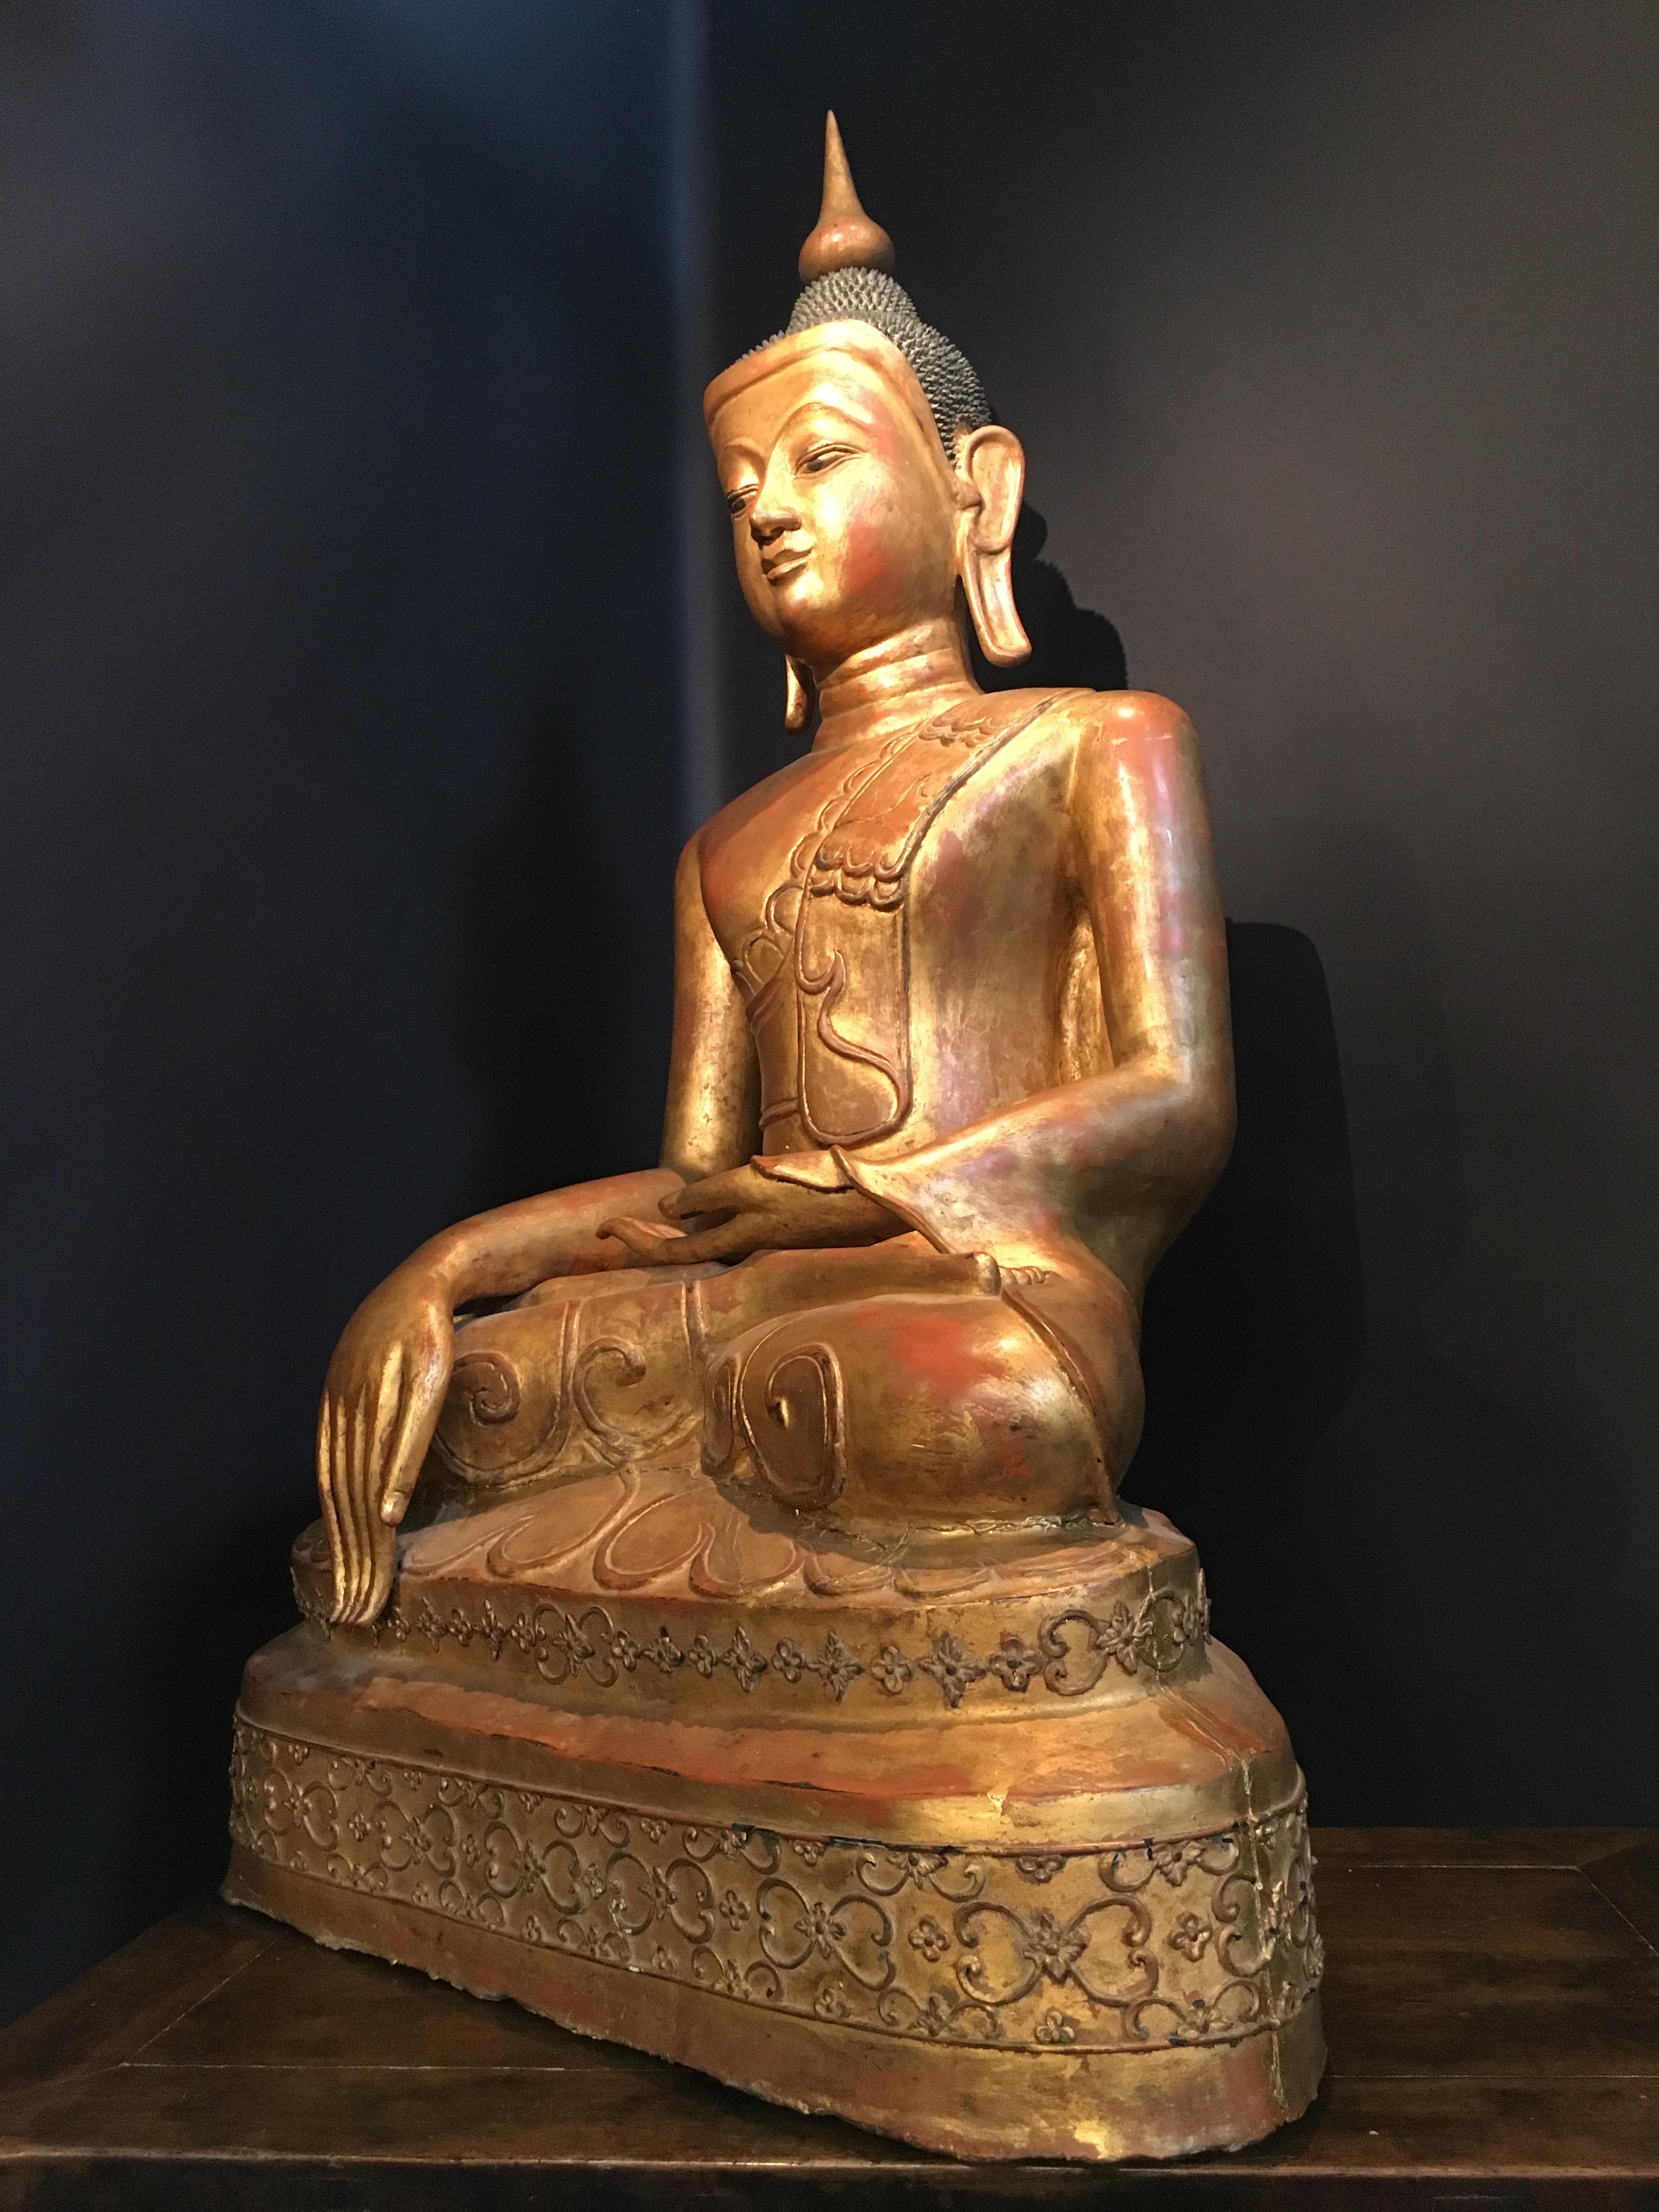 A large and impressive Burmese papier mâché gilt lacquer figure of the historical Buddha, Shakyamuni, Shan States, Burma (now Myanmar) circa 1880 - 1900.
The Buddha sits in vajrasana upon a stepped platform, hands in bhumisparsha, one hand upturned